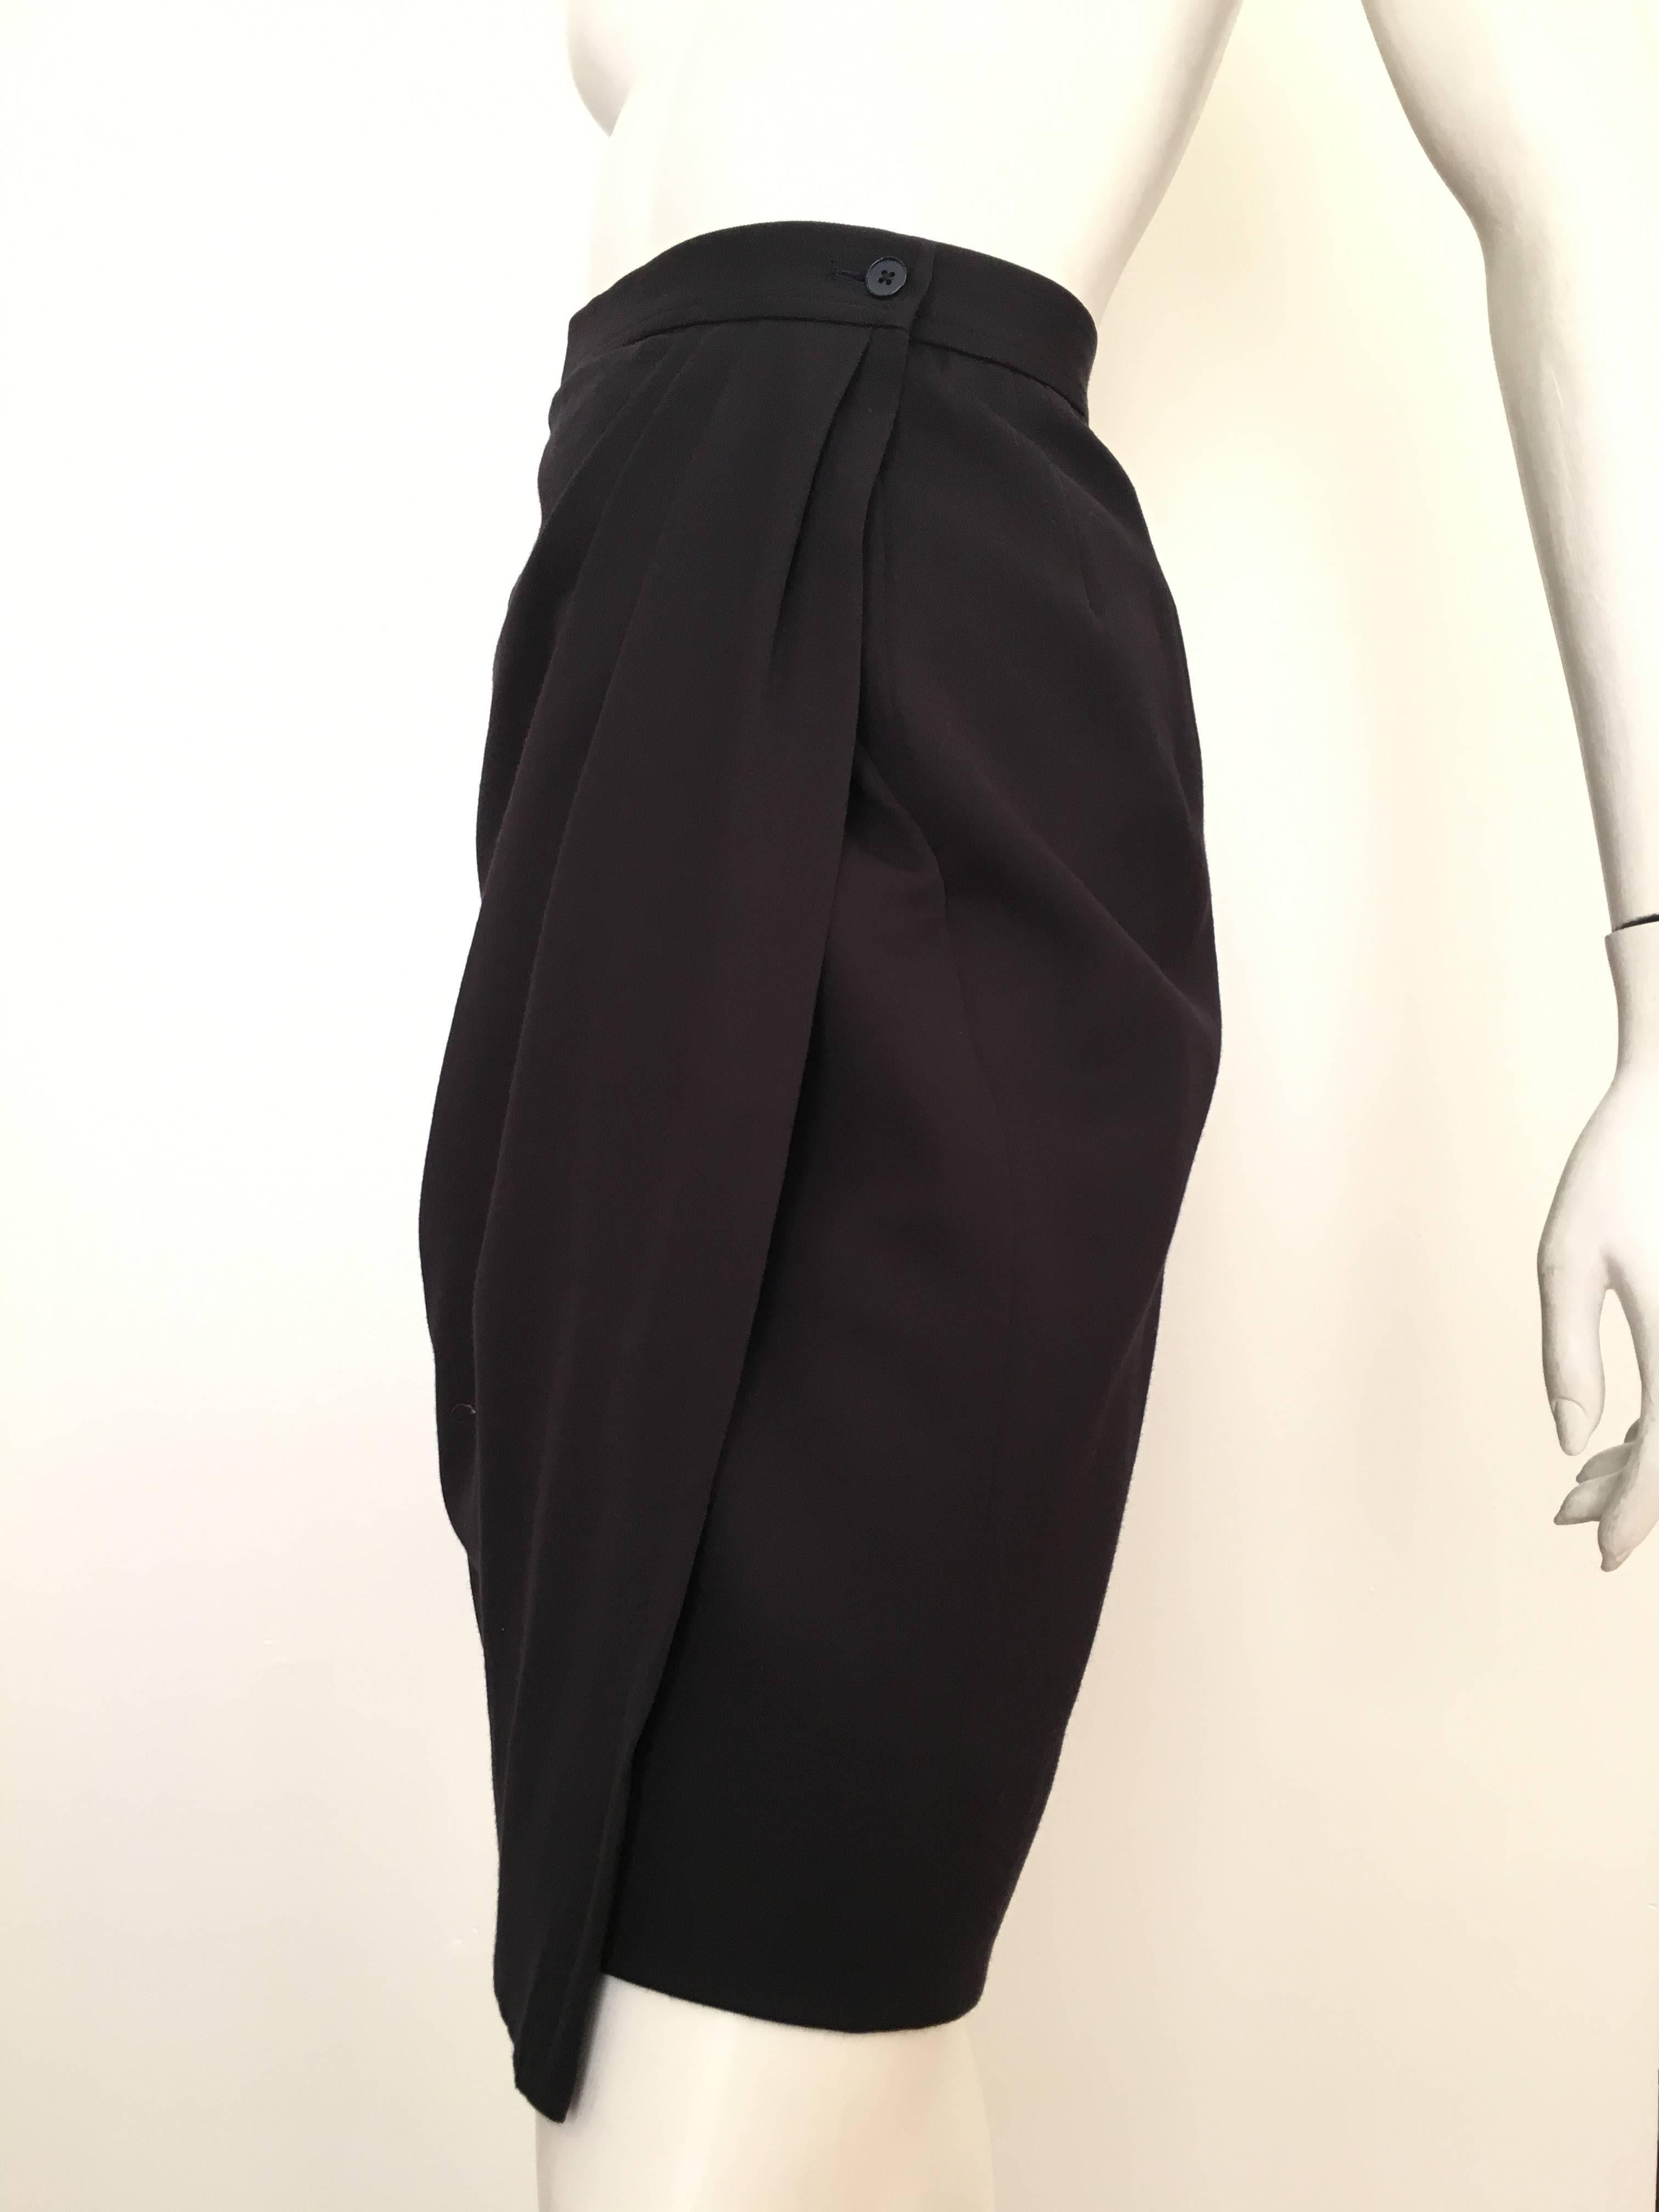 Yves Saint Laurent 1990s Black Wool Wrap Skirt with Pockets Size 6 / 8. For Sale 1